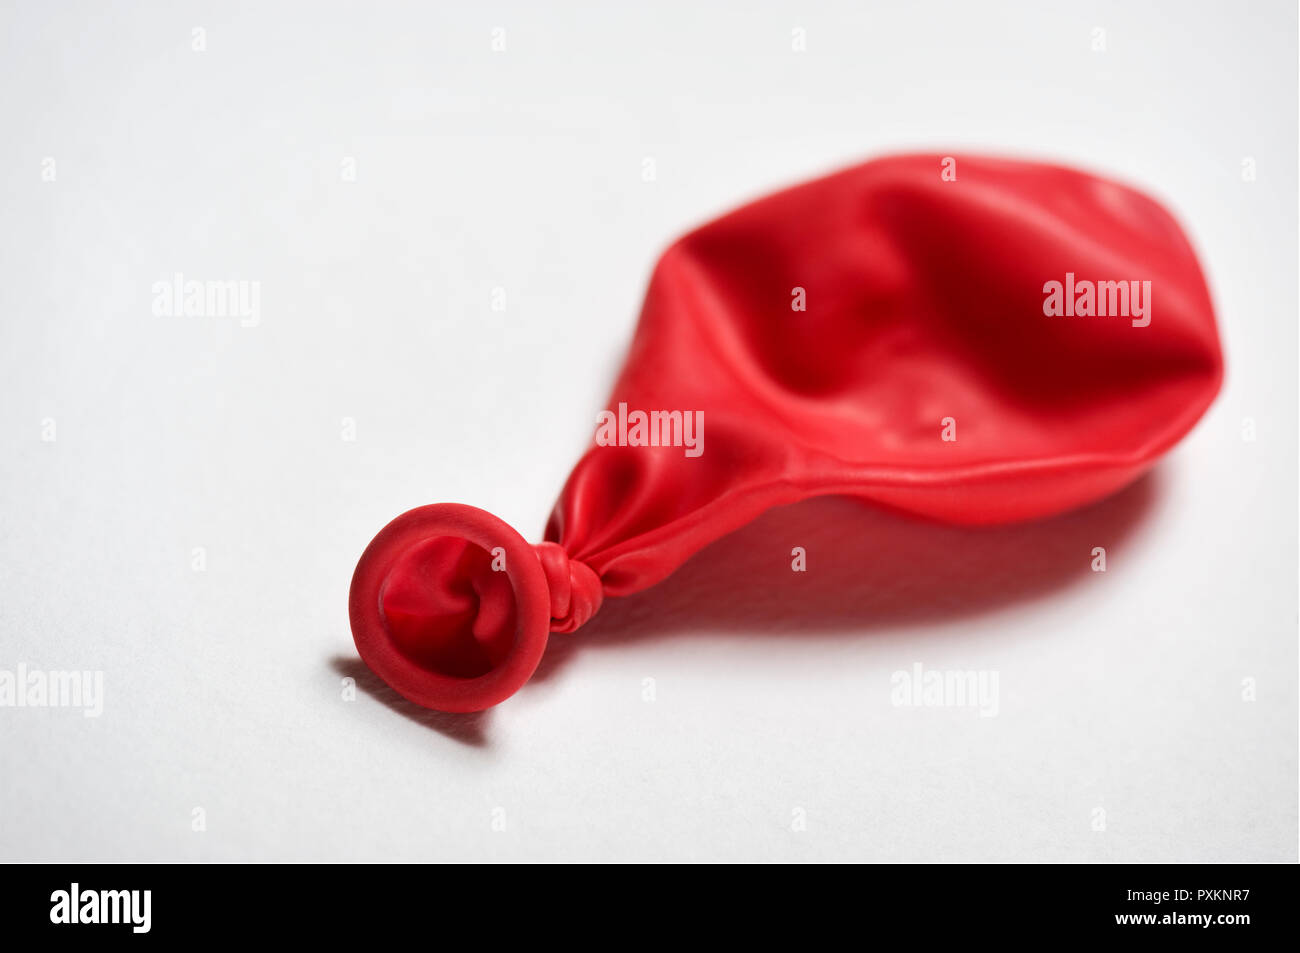 A red balloon on a white background Stock Photo